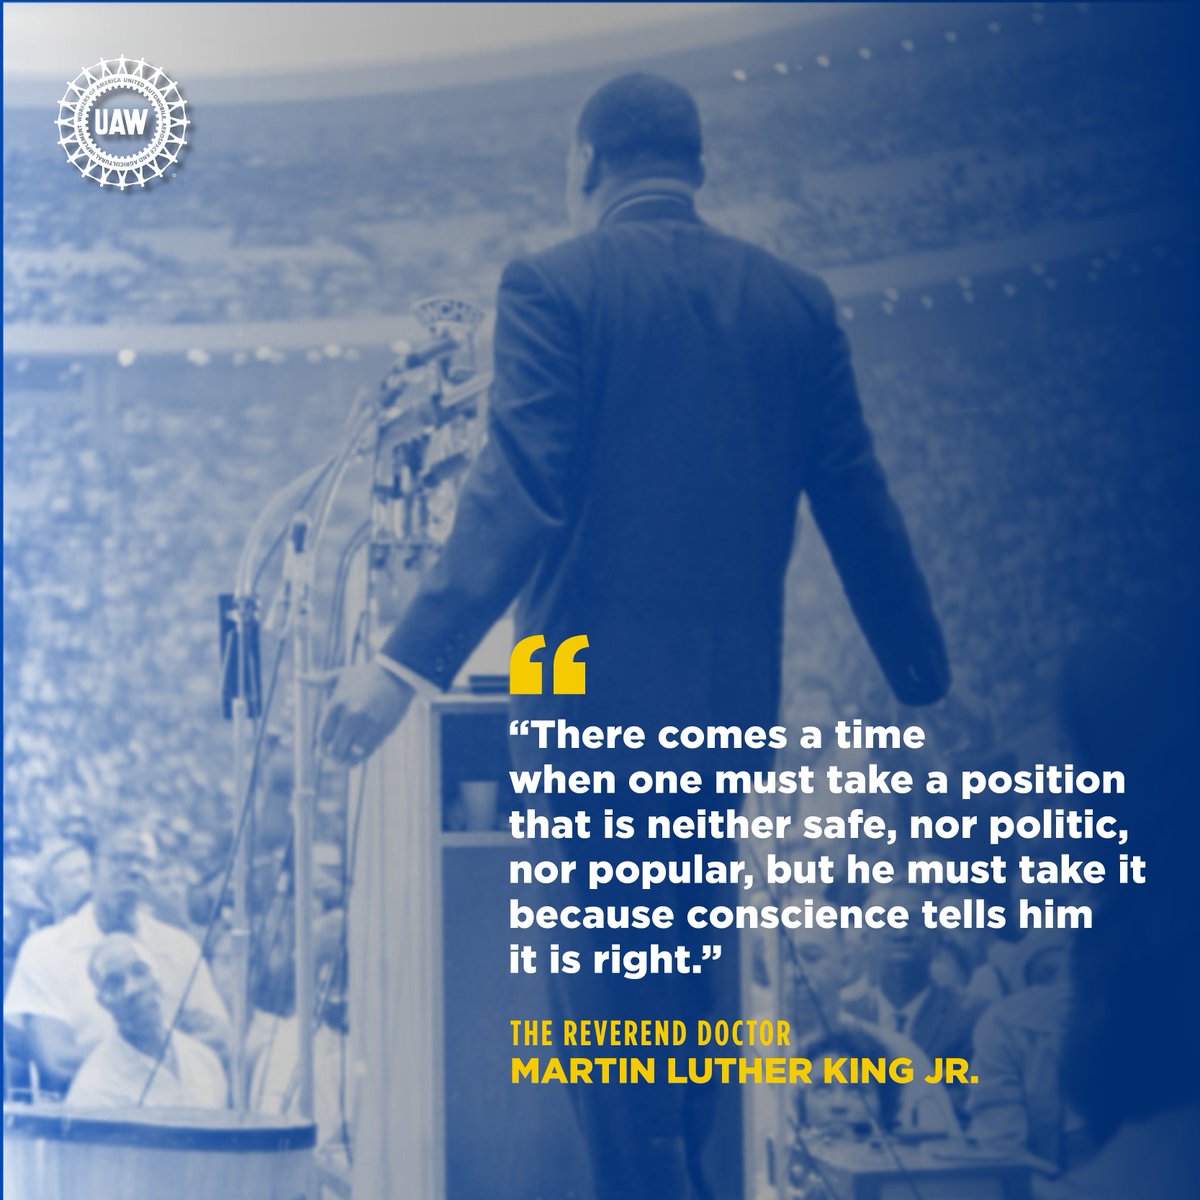 Join #UAW President Shawn Fain at the 21st Detroit Martin Luther King Day Rally & March at 12 pm ET. mlkdetroit.org #StandUpUAW #MLKDay 📸 @ReutherLibrary